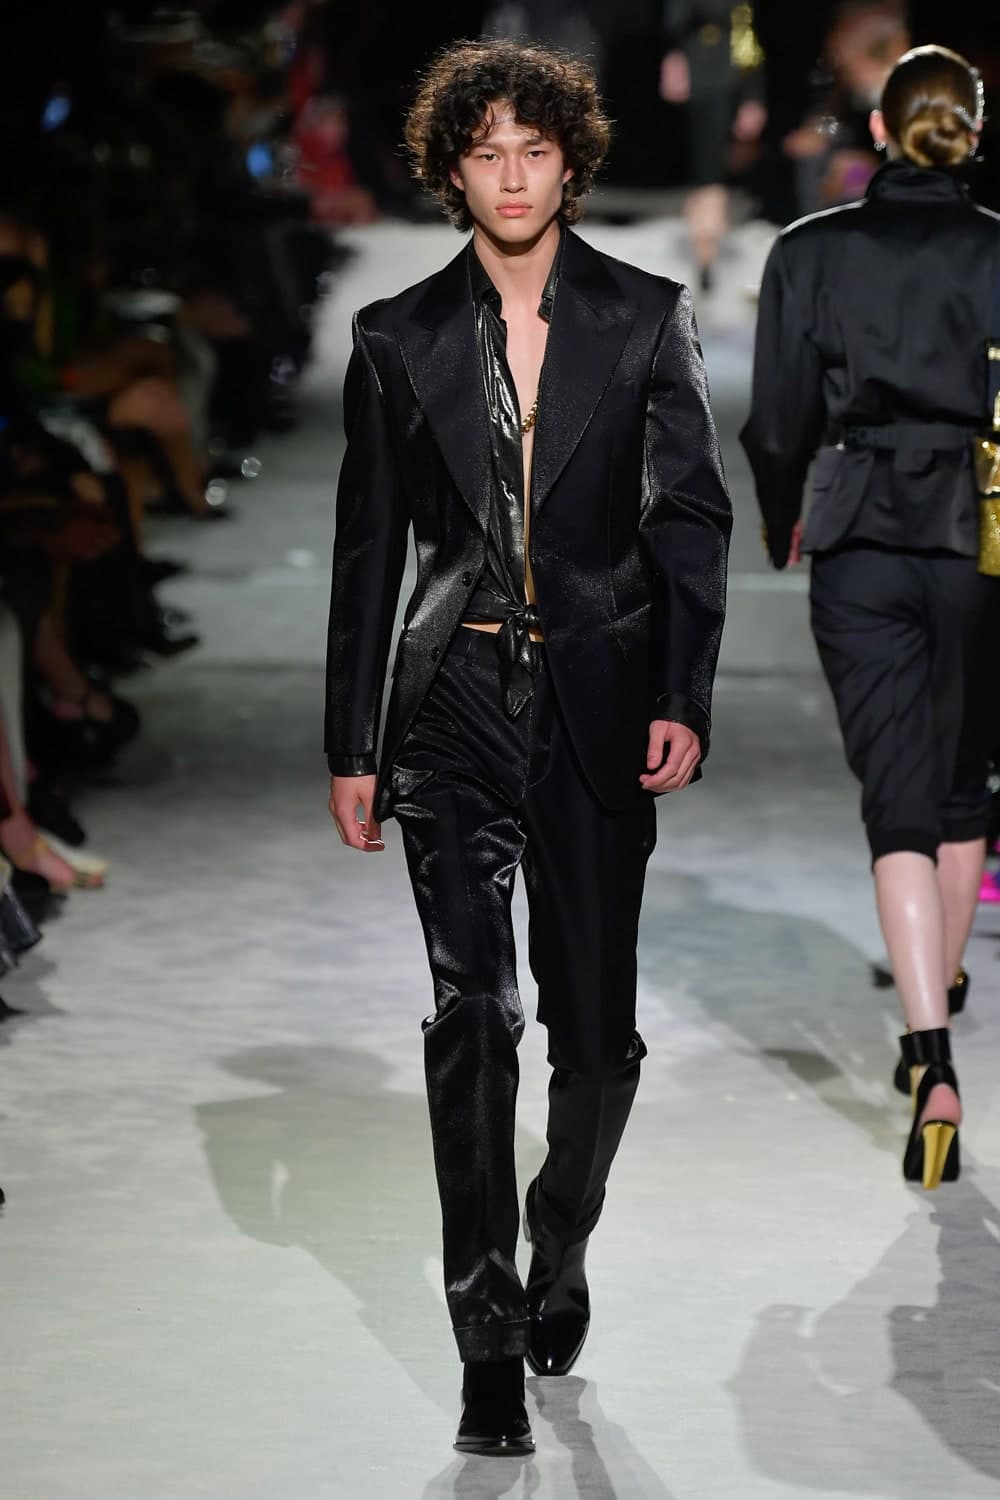 Tom Ford Spring 2022 Fashion Show Review | The Impression